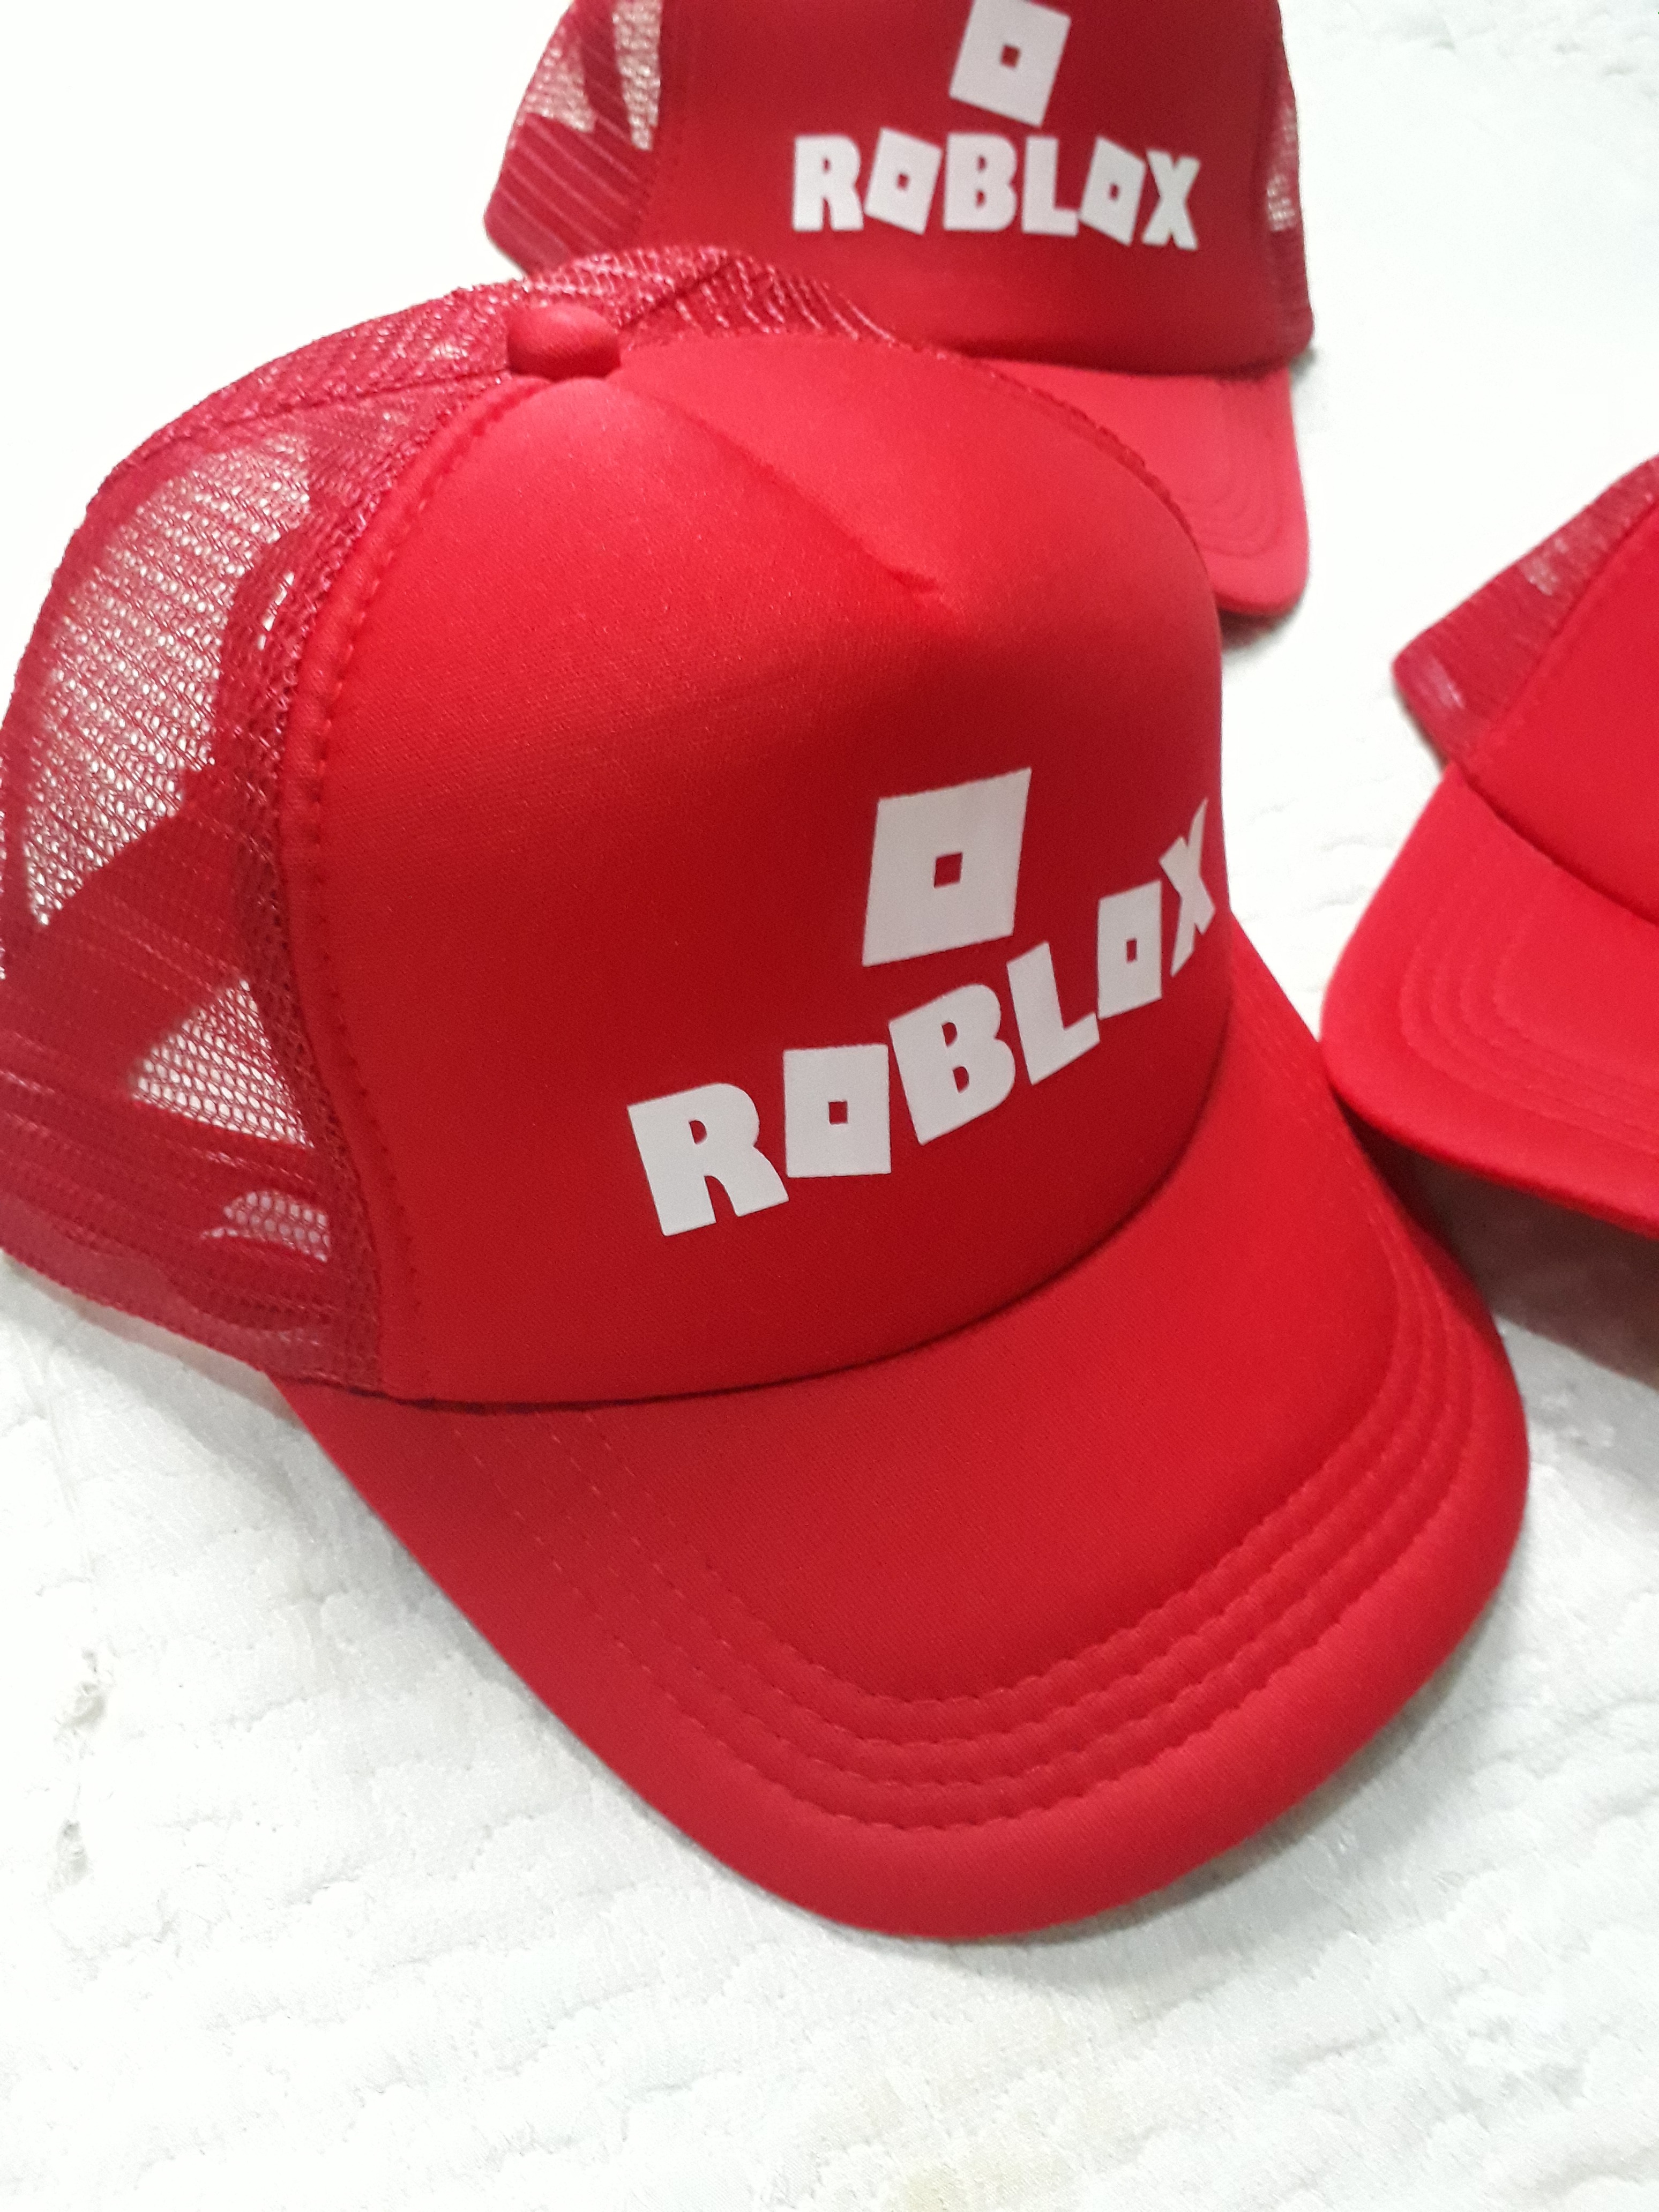 Roblox Cap Team Red Buy Sell Online Hats Caps With Cheap Price Lazada Ph - red team test roblox